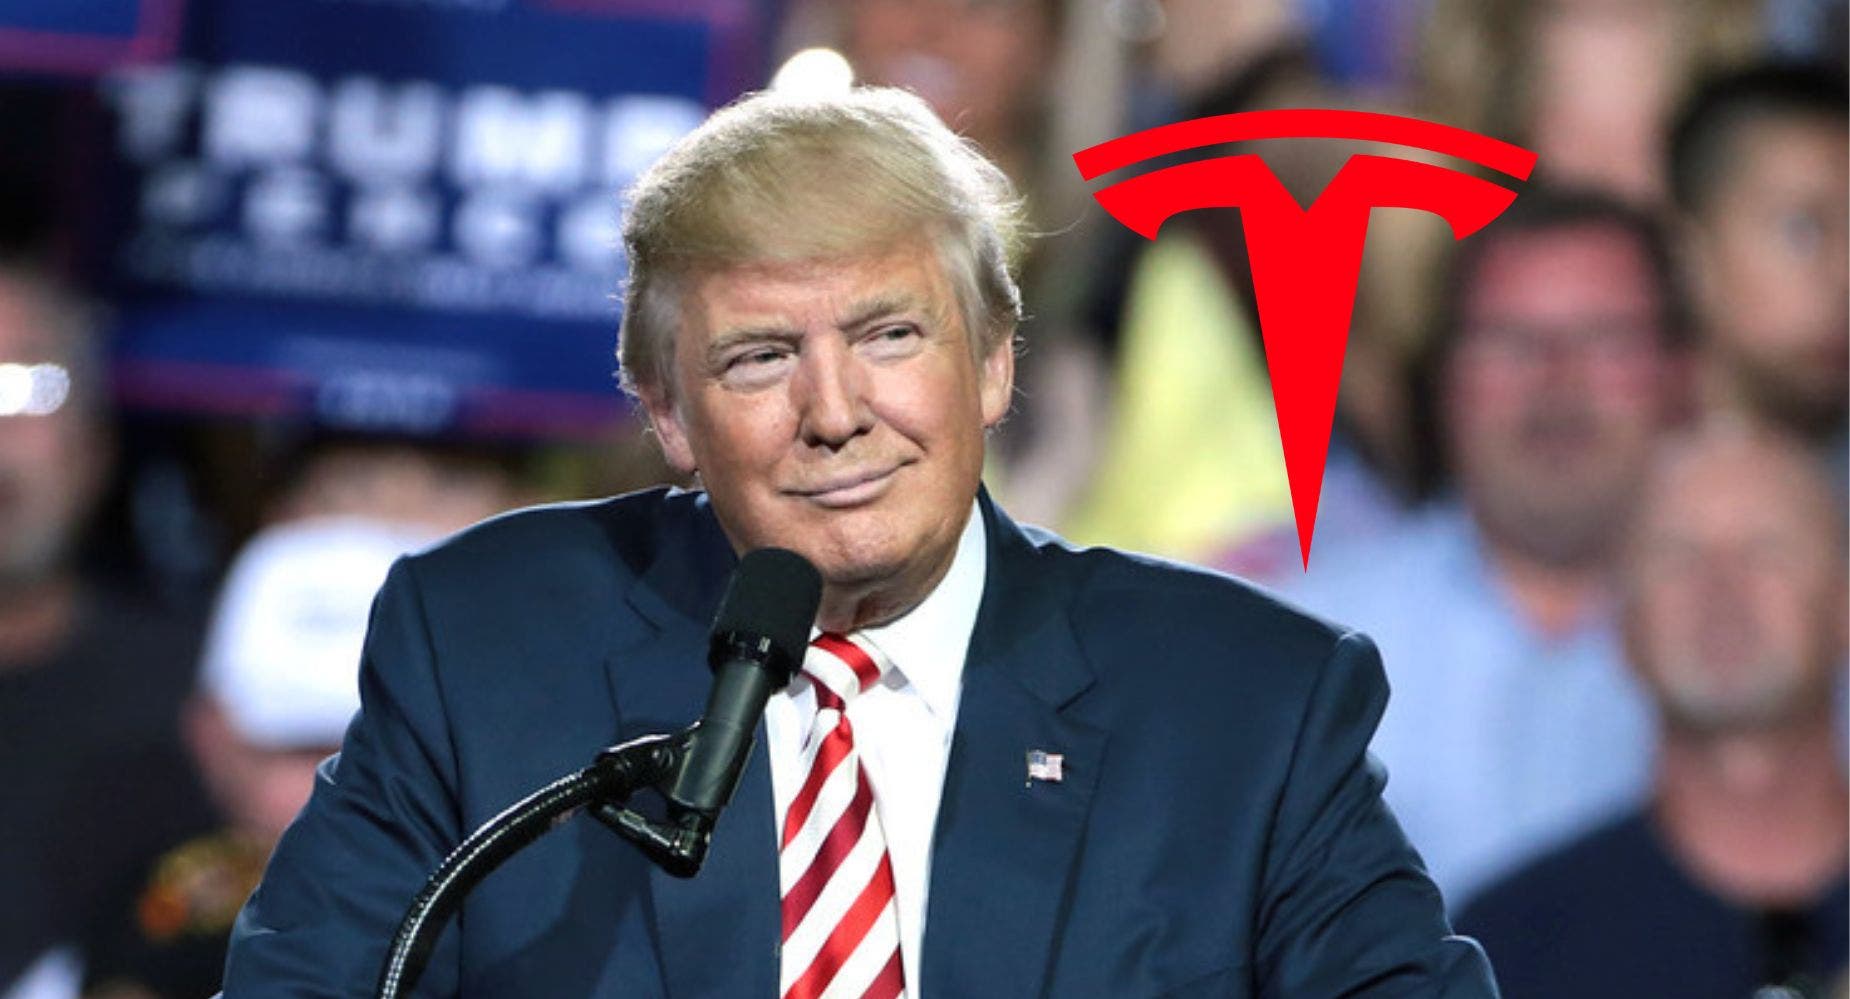 If You Invested $1,000 In Tesla Stock When Donald Trump Announced He Was Running For President, Here's How Much You'd Have Now